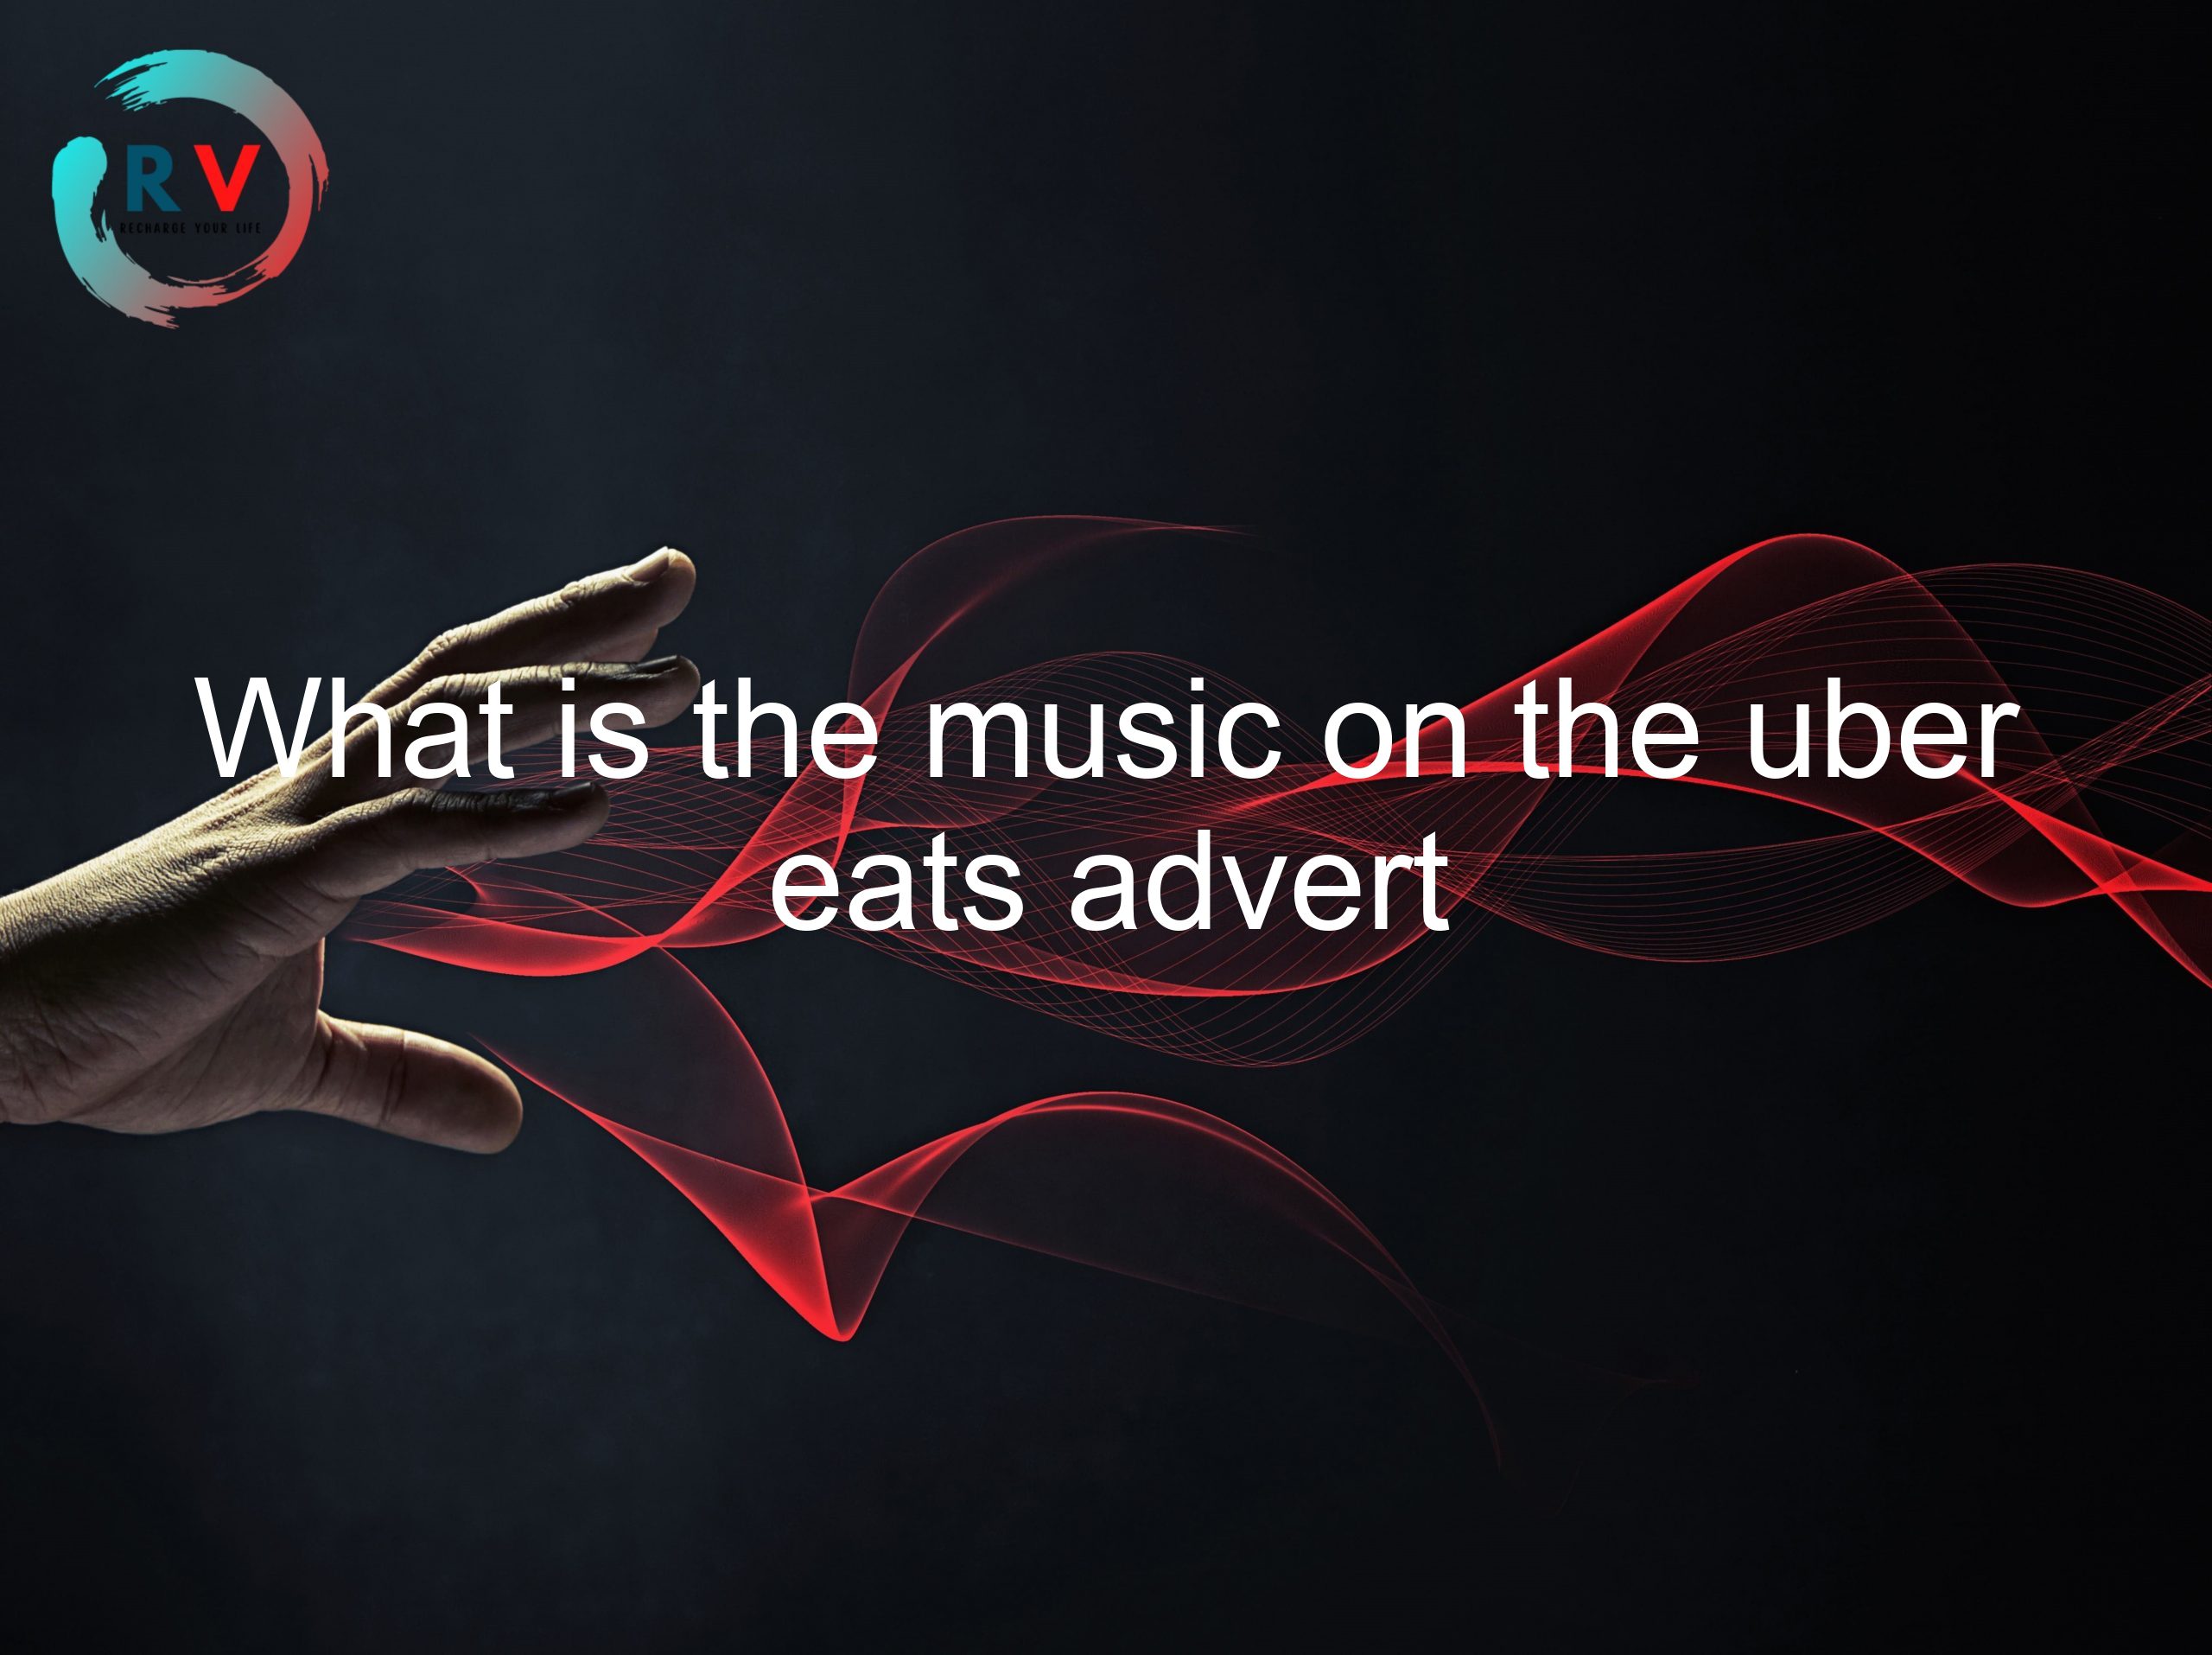 What is the music on the uber eats advert